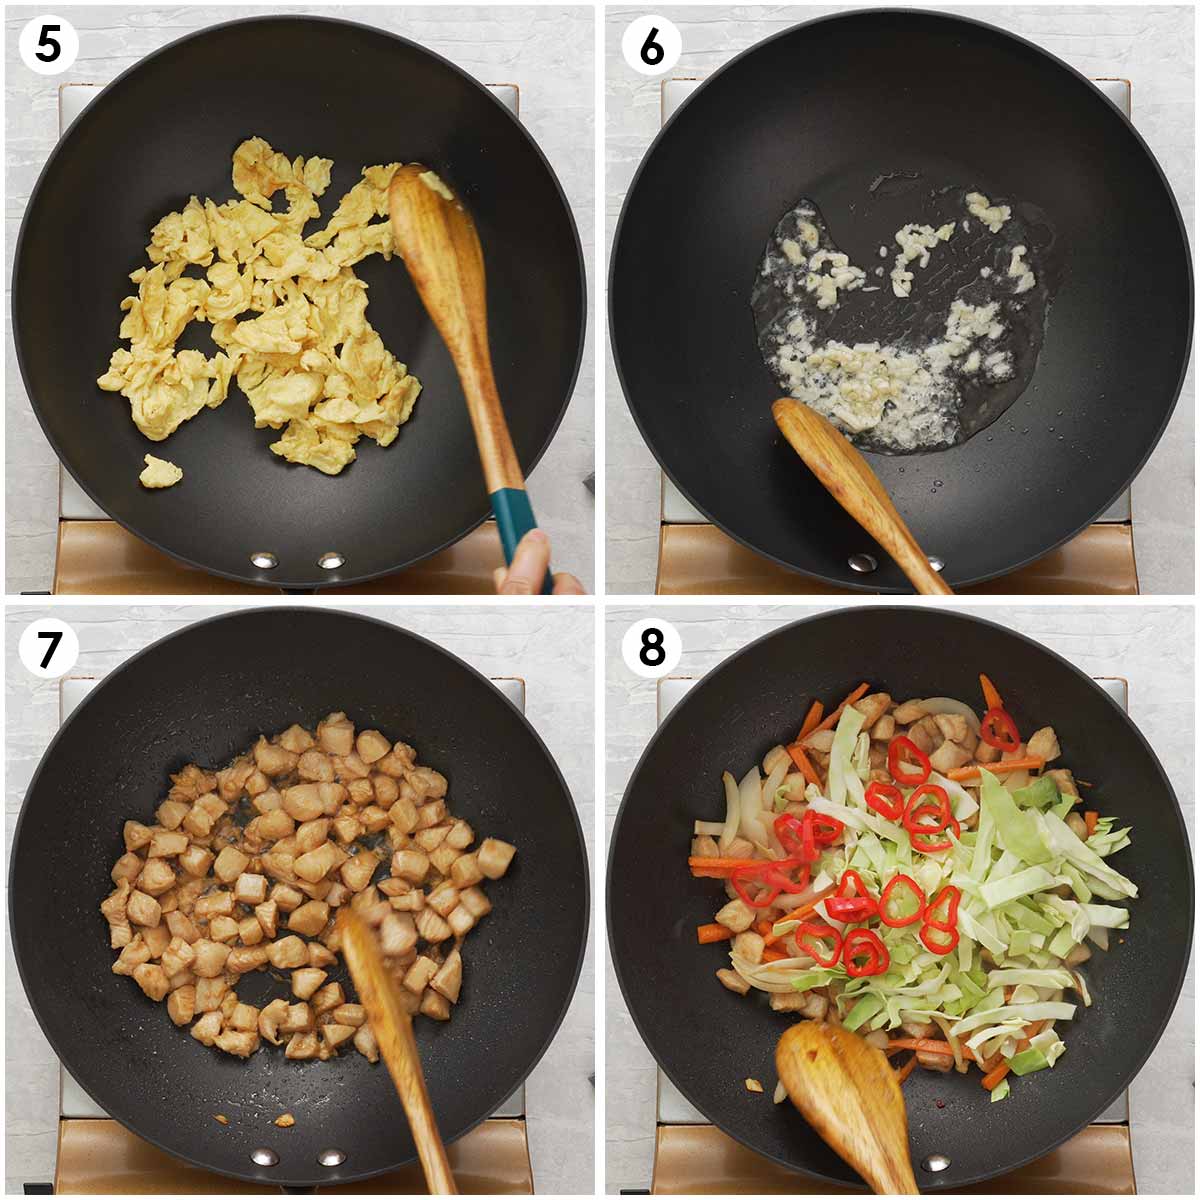 4 image collage showing how to make crumble eggs and how to stir fry chicken and vegetables.